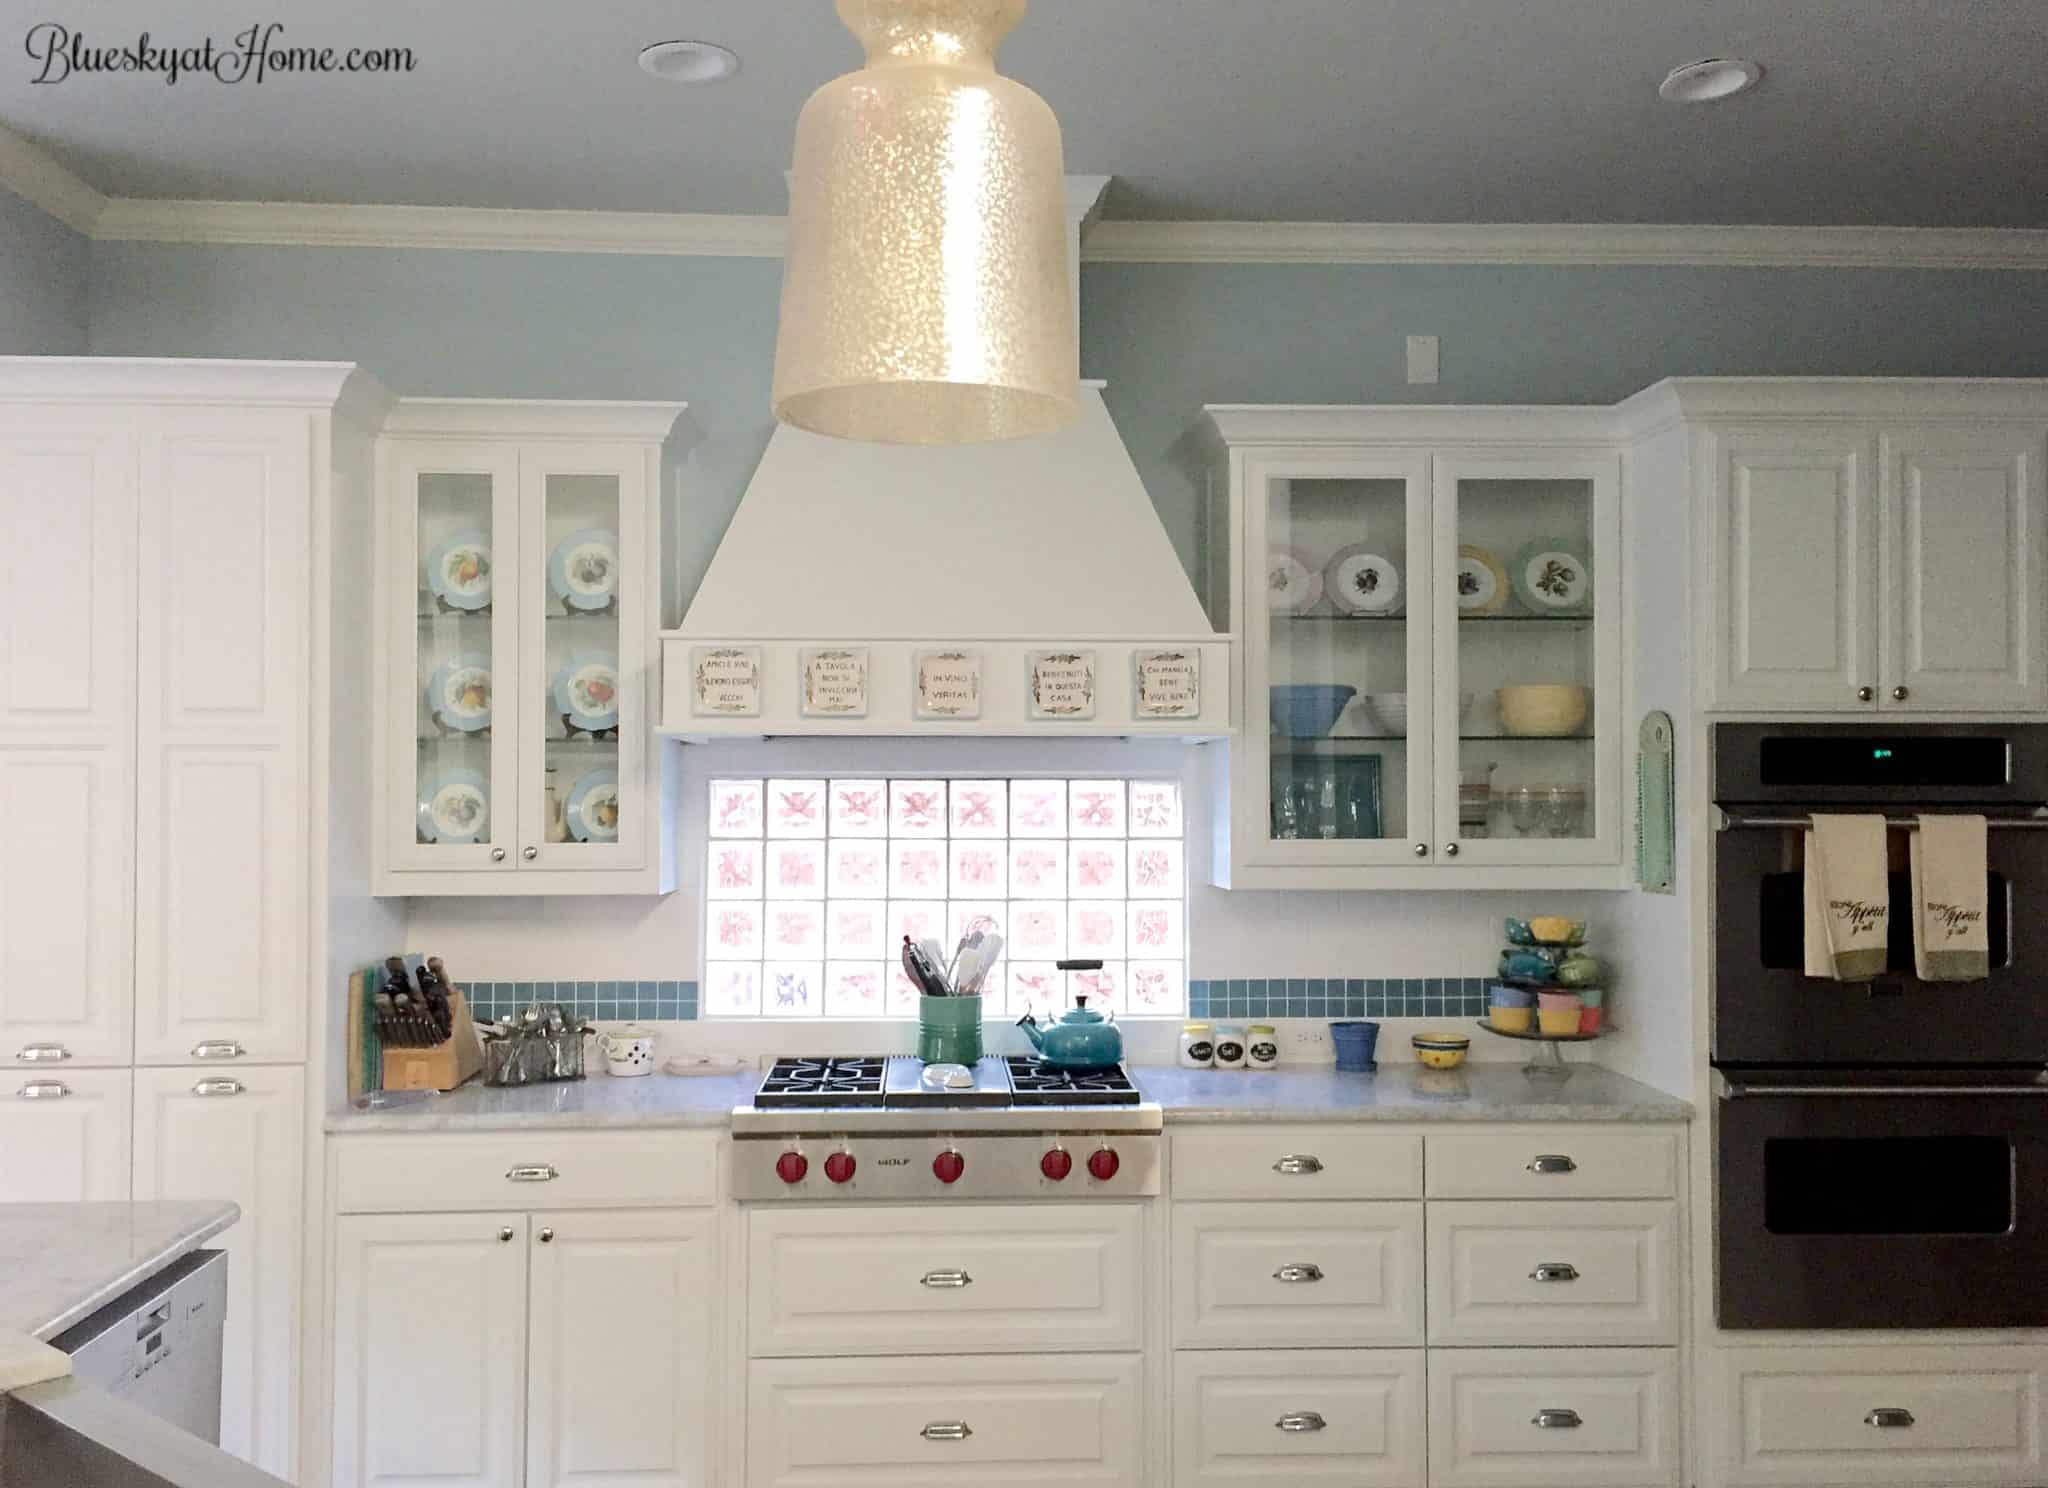 How to Turn a Console Table into a Kitchen Island